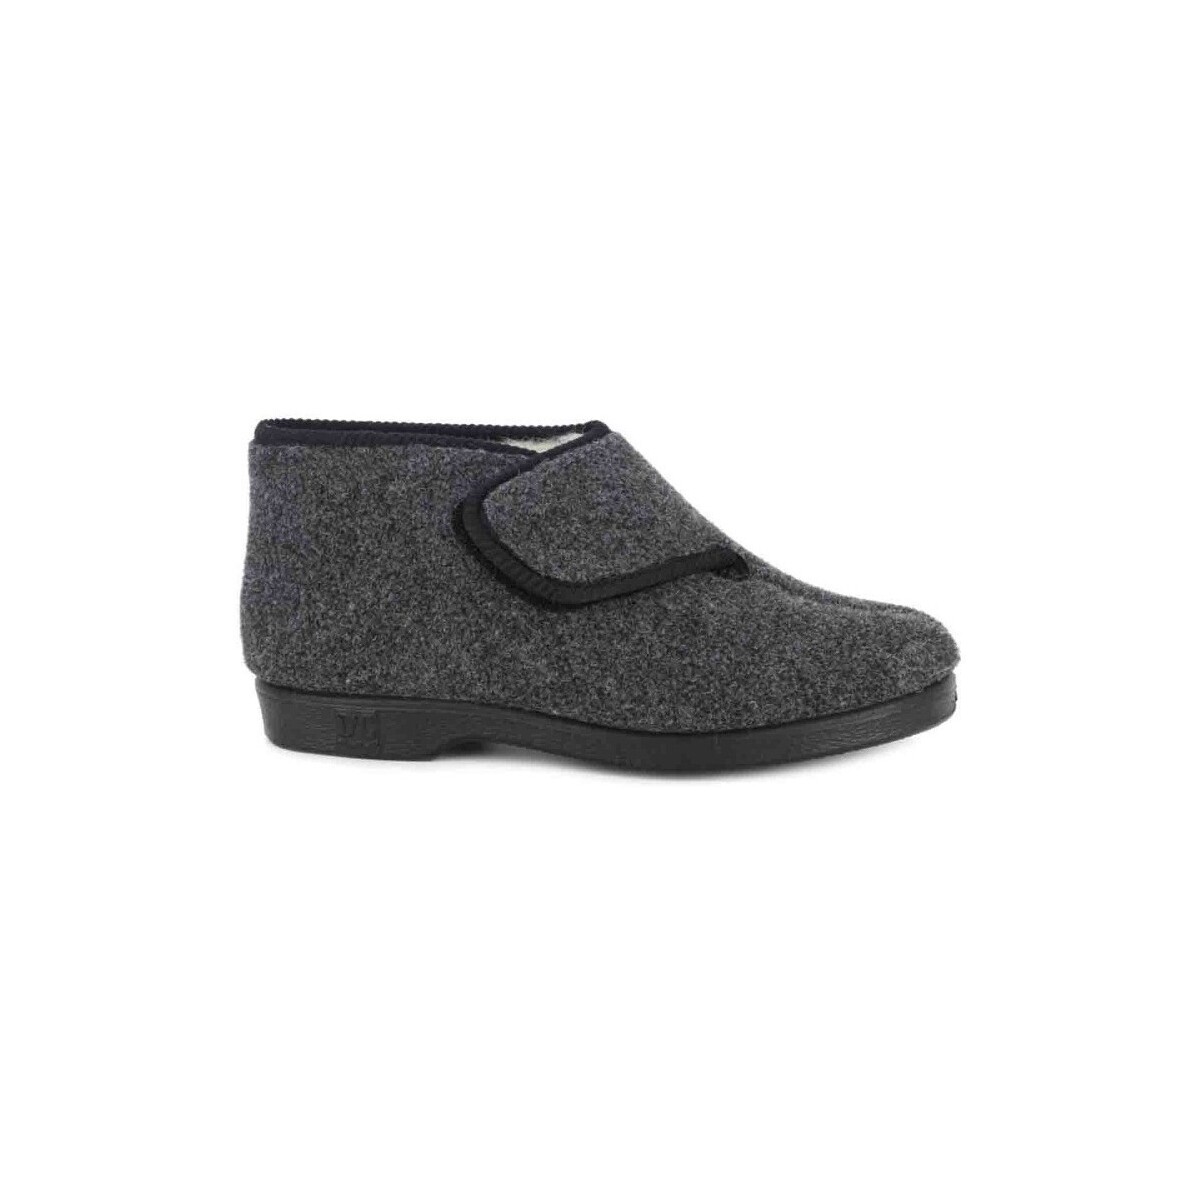 Chaussures Femme Chaussons Doctor Cutillas 374 Gris